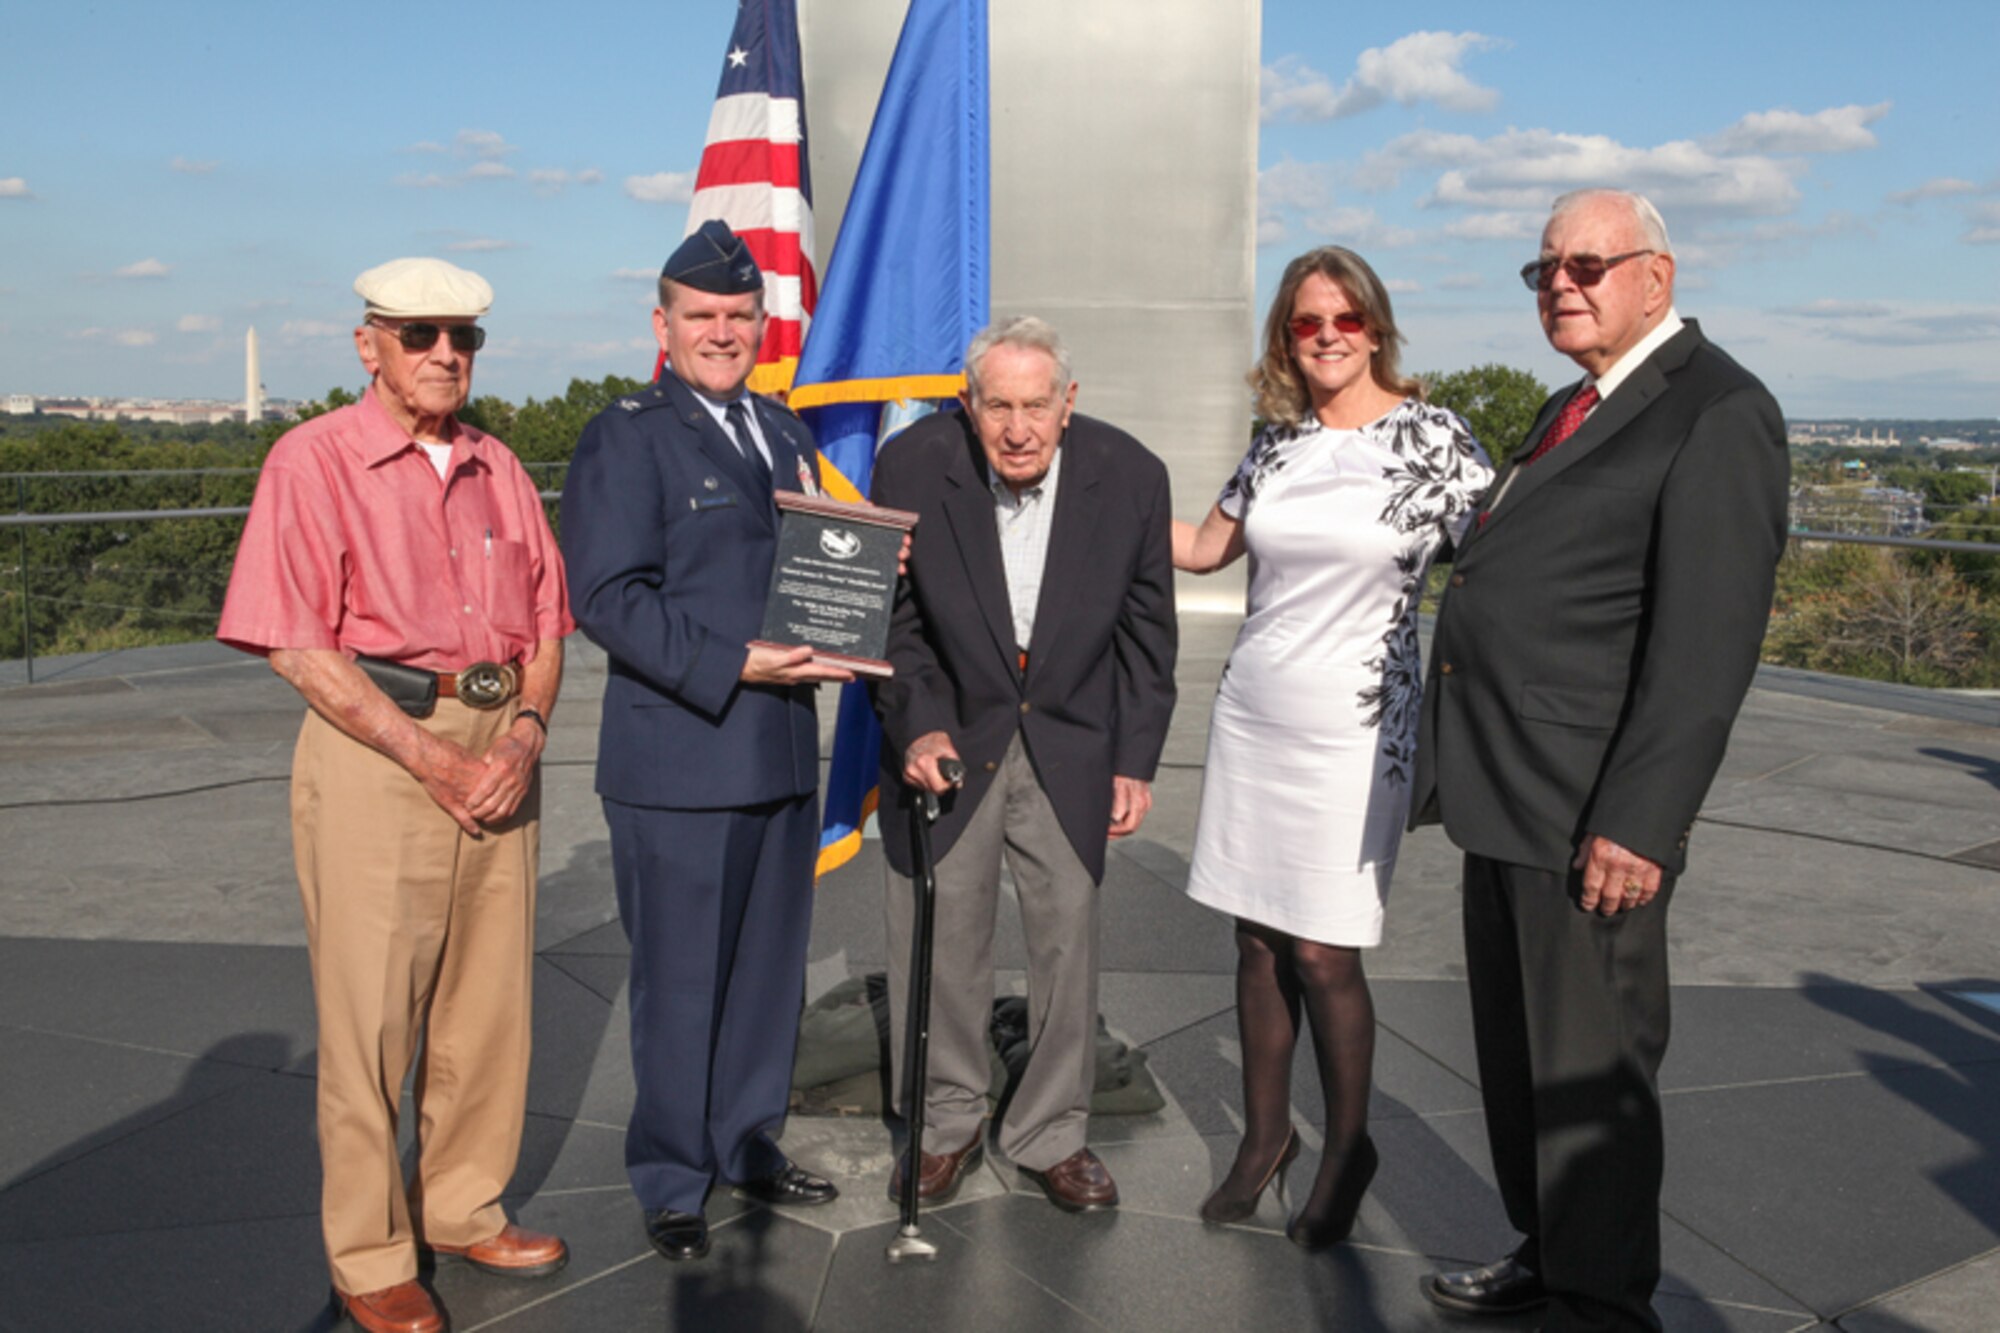 U.S. Air Force Col. Thomas Torkelson, second from the left, 100th Air Refueling Wing commander, holds the Air Force Historical Foundation’s Doolittle Award, presented to the 100th ARW Sept. 27, 2016, as he poses for a photo with Jonna Doolittle Hoppes, second from the right, granddaughter of Gen. James Harold “Jimmy” Doolittle, and 100th Bomb Group veterans at Arlington, Va. The award was named after Doolittle Hoppes’ grandfather, a pioneering pilot whose career stretched from World War I to the height of the Cold War. It was presented in recognition of the 100th ARW’s sustained and significant contributions to Air Force history. (Courtesy photo) 